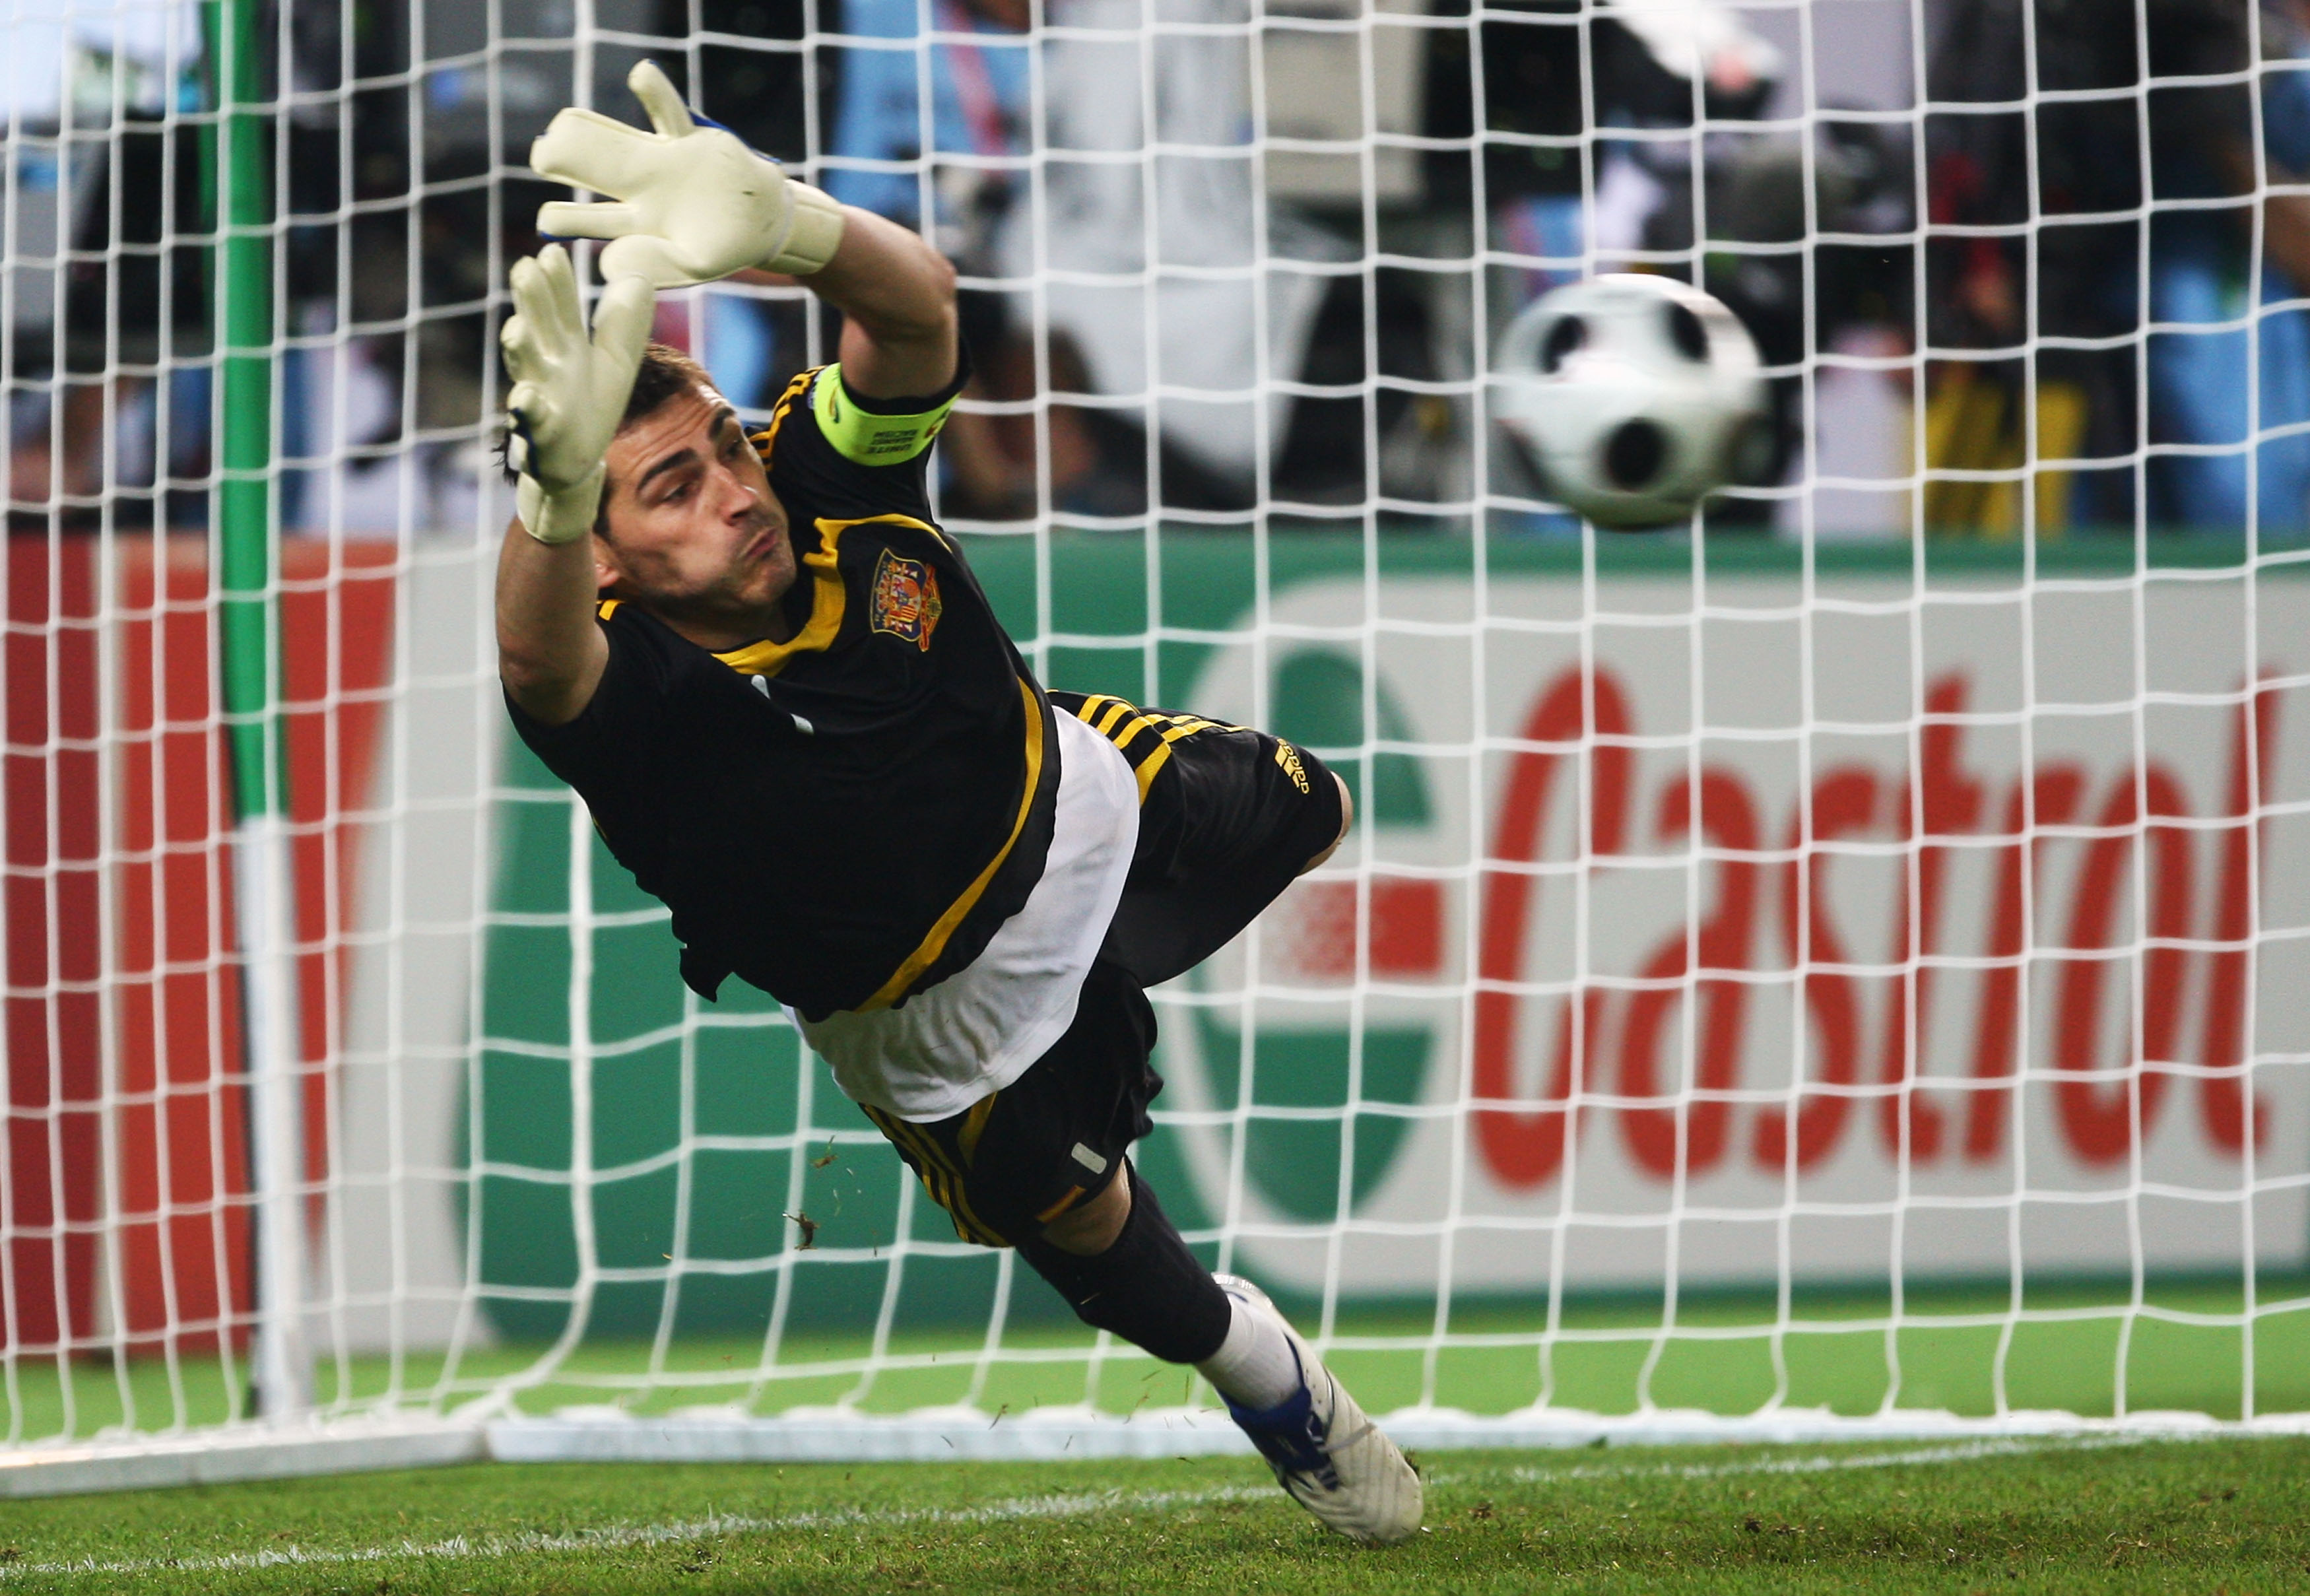 VIENNA, AUSTRIA - JUNE 22:  Goalkeeper Iker Casillas of Spain saves a penalty during the UEFA EURO 2008 Quarter Final match between Spain and Italy at Ernst Happel Stadion on June 22, 2008 in Vienna, Austria.  (Photo by Clive Mason/Getty Images)